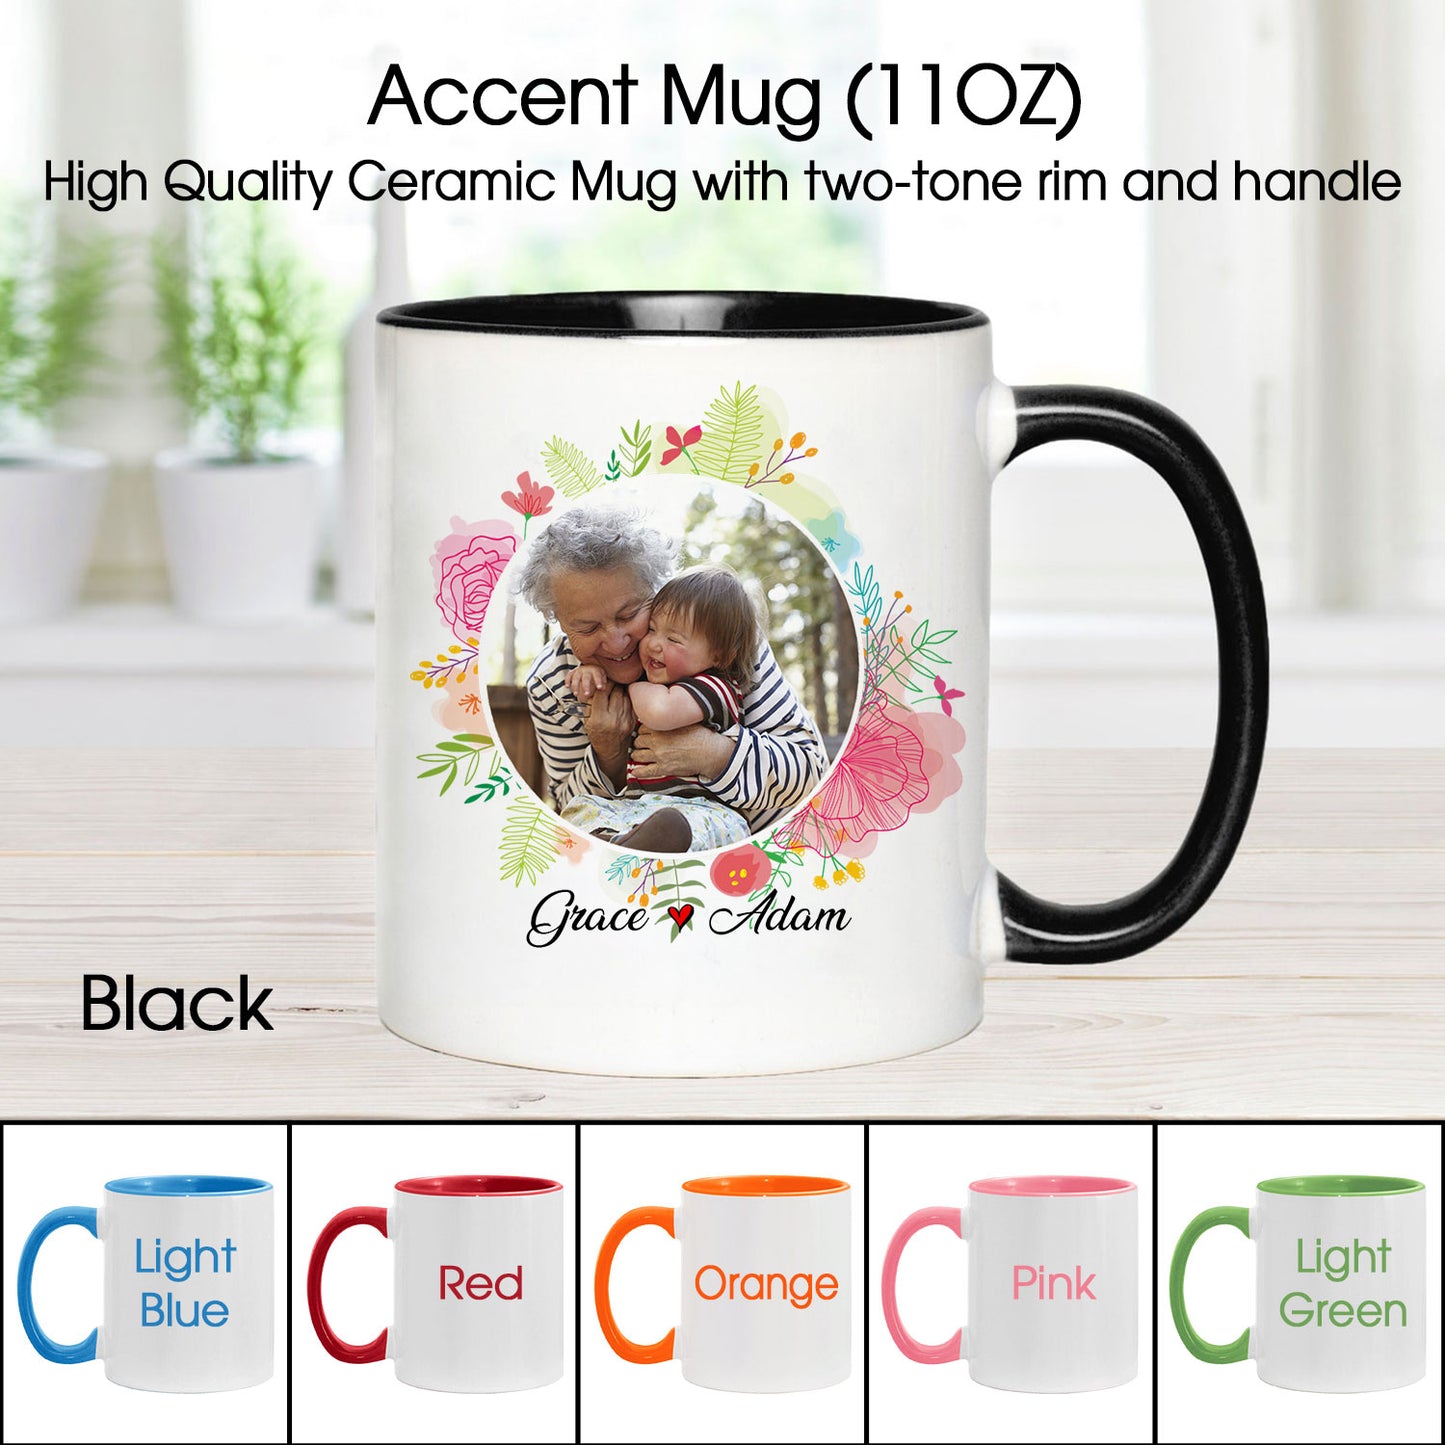 I'm A Grandma What's Your Superpower Custom Mug With Your Name & Photo